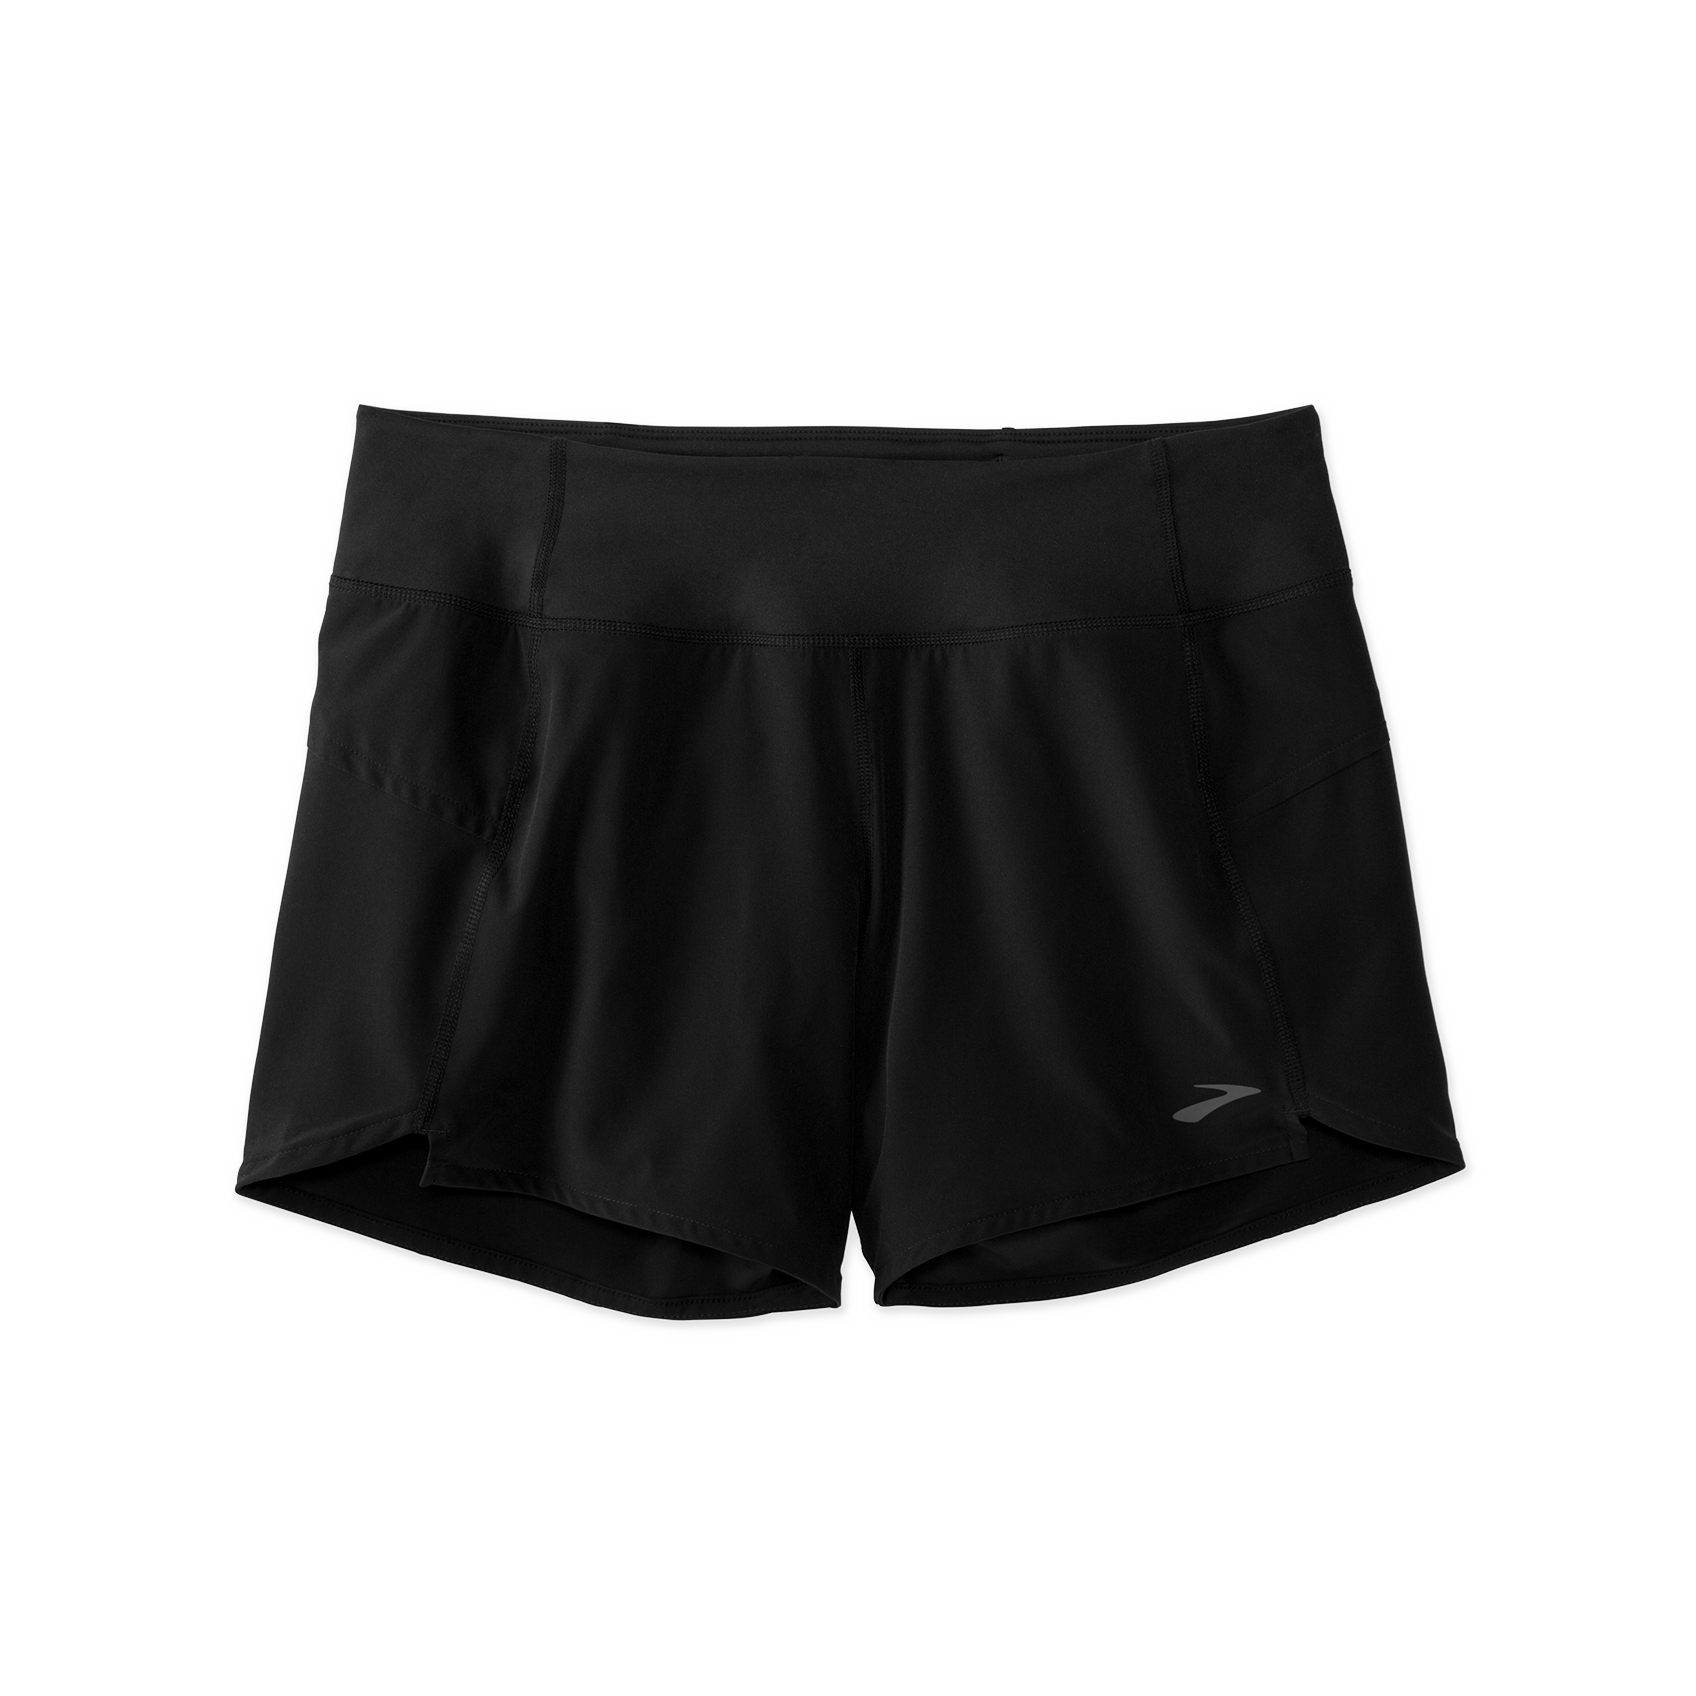 Half tights “modesty” question for men : r/running